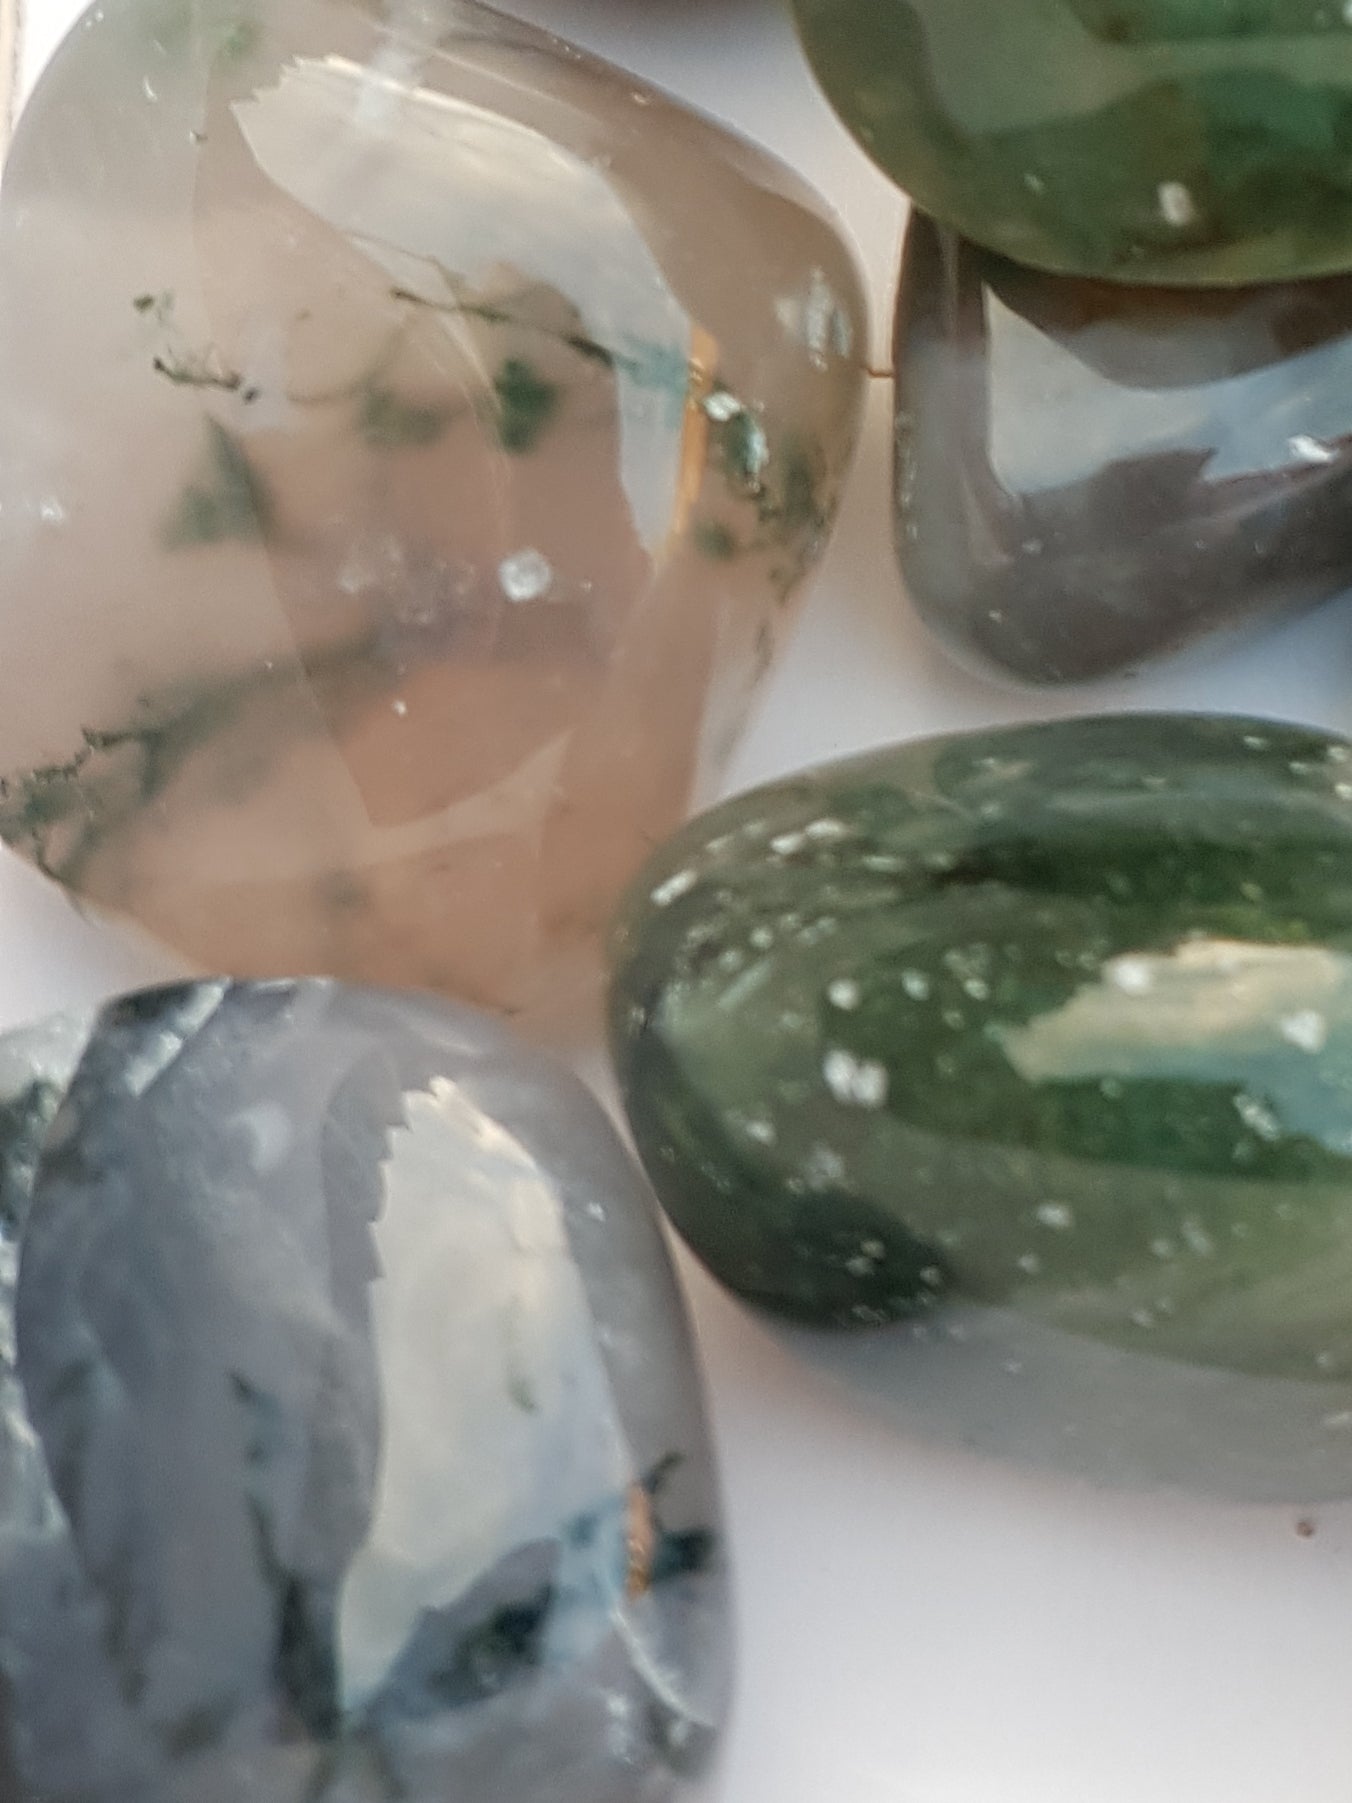 a close up of three tumbled pieces of green moss agate. The pieces are translucent and clear. Inside the stone are strands of a dark green material.